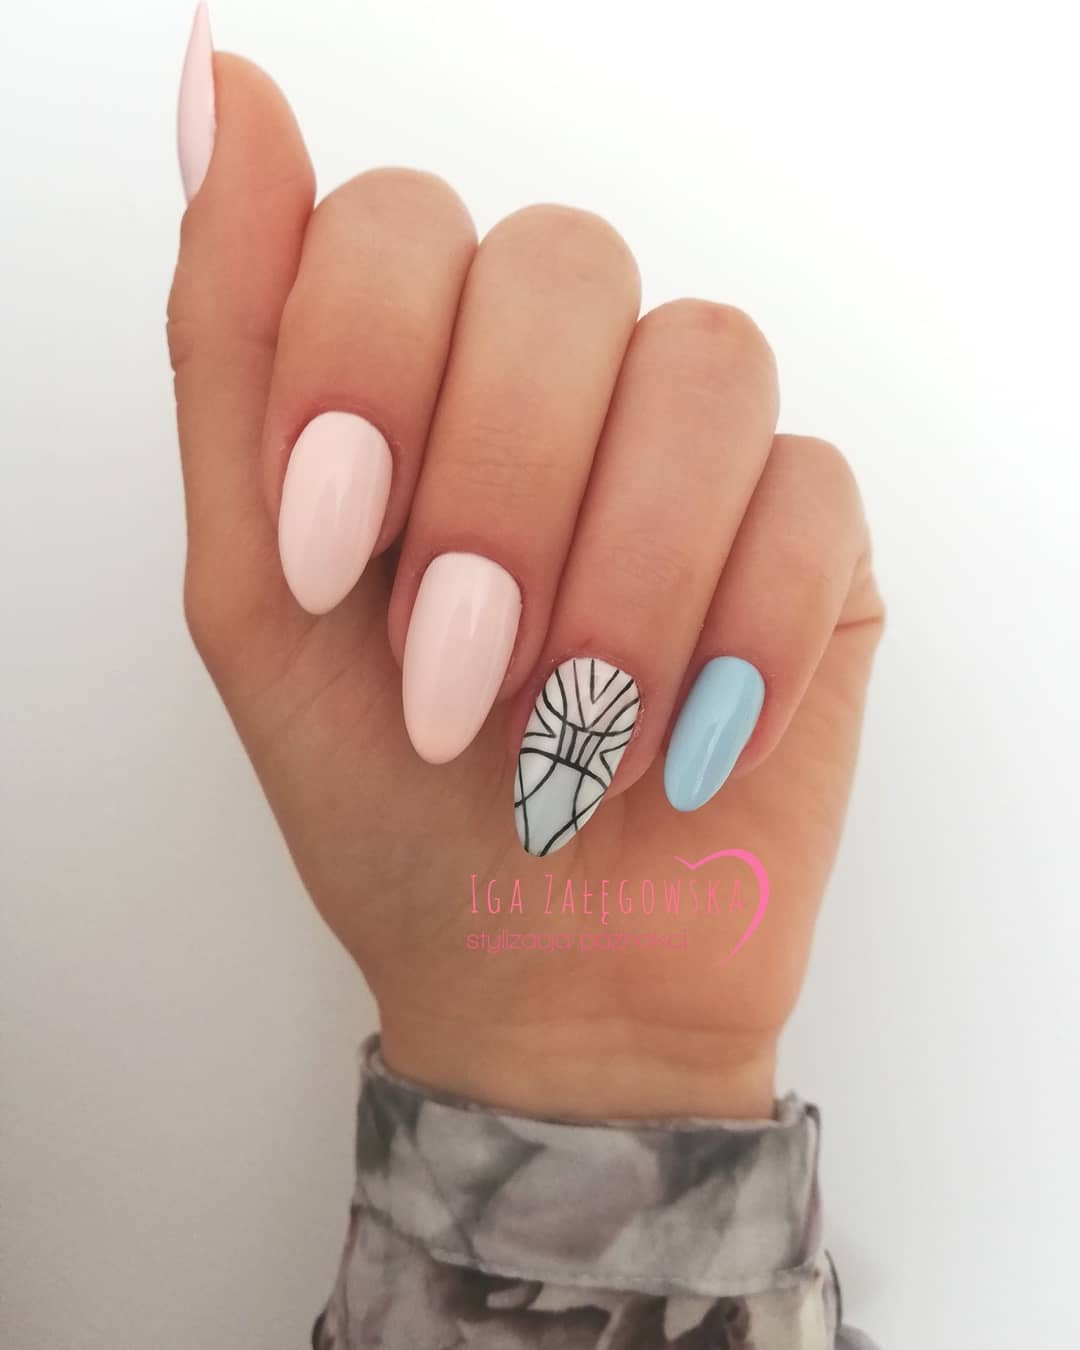 Nice light pink and blue geometric nails